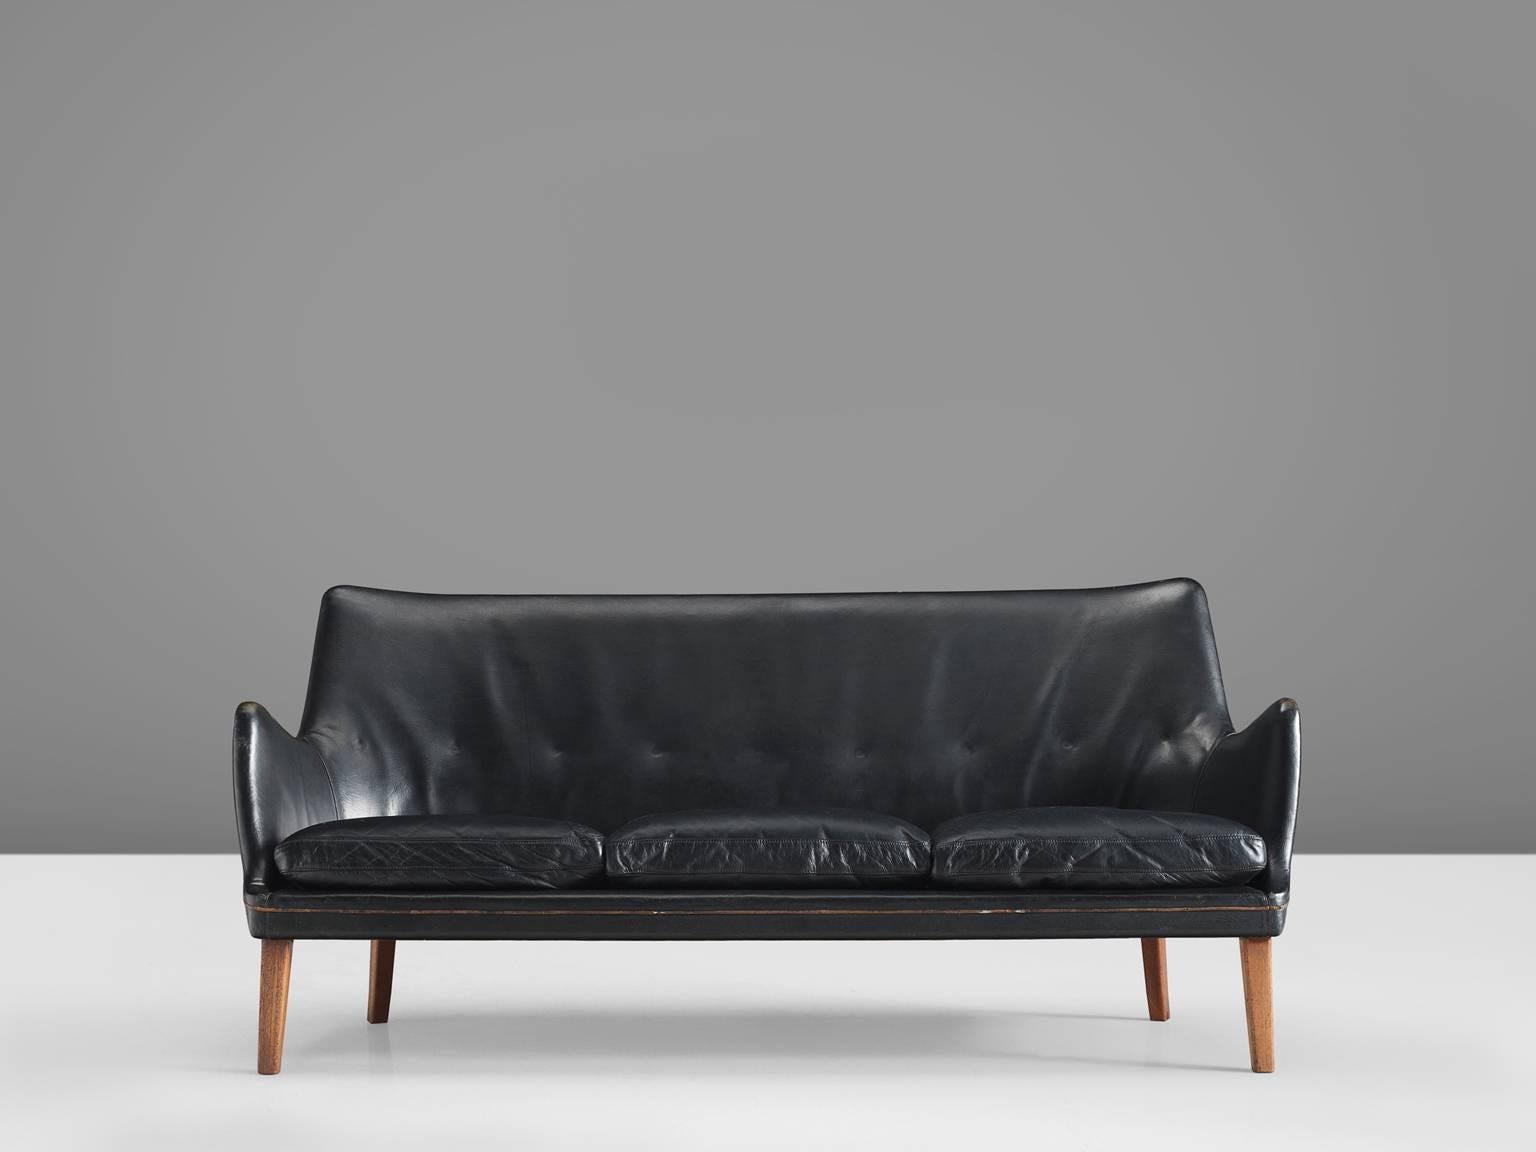 Arne Vodder for Ivan Schlechter, sofa, black leather and wood, Denmark, 1953.

Elegant three-seat sofa in black leather by Danish designer Arne Vodder. This sofa shows the great craftsmanship of Arne Vodder. The seating and back features organic